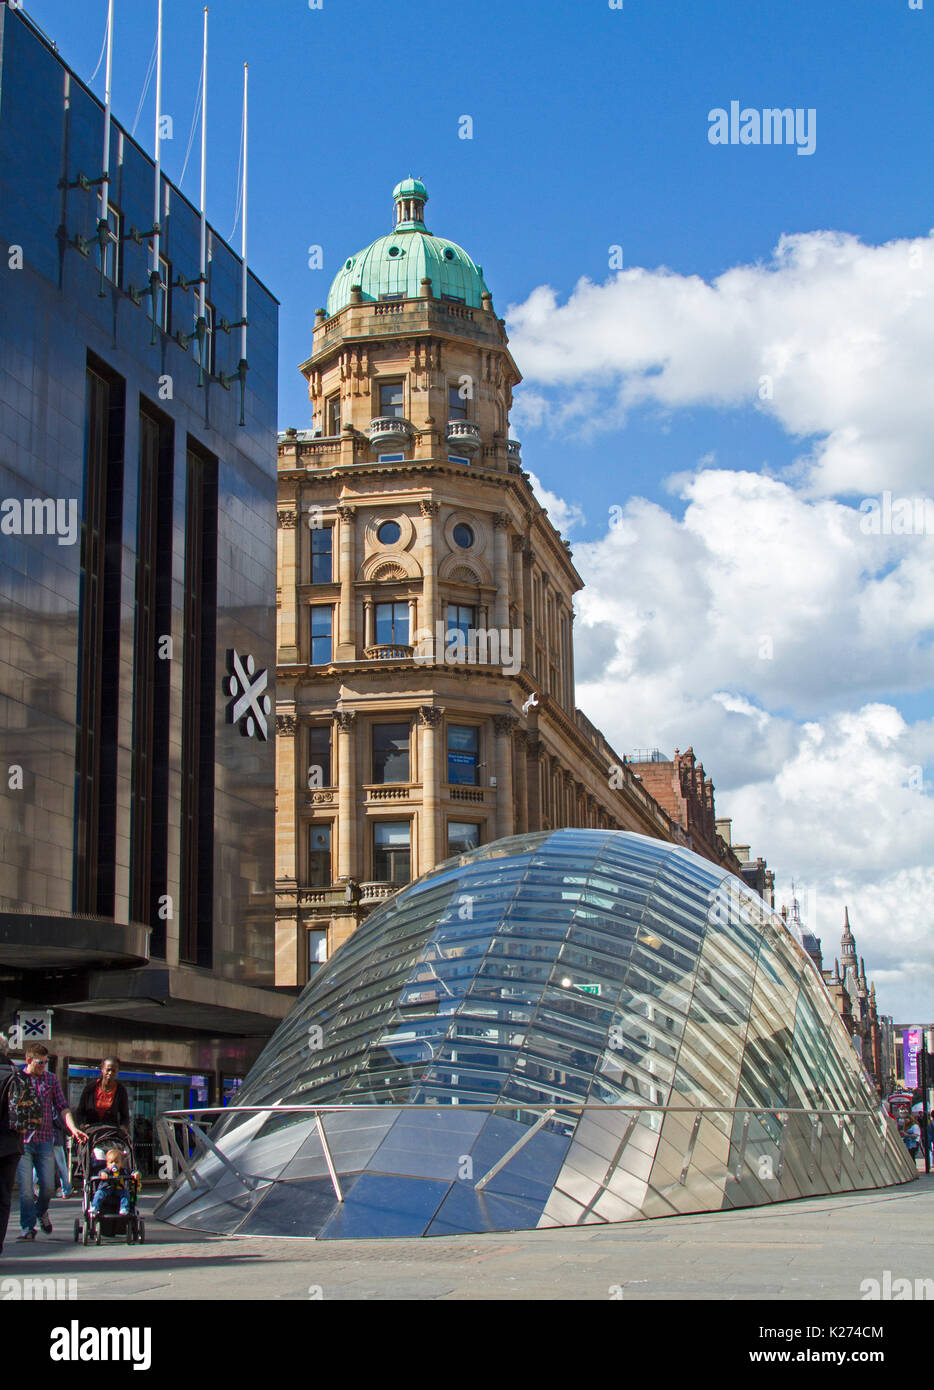 Modern architecture - glass domed entrance to St Enoch subway beside elegant historic buildings from a past era in Glasgow, Scotland Stock Photo